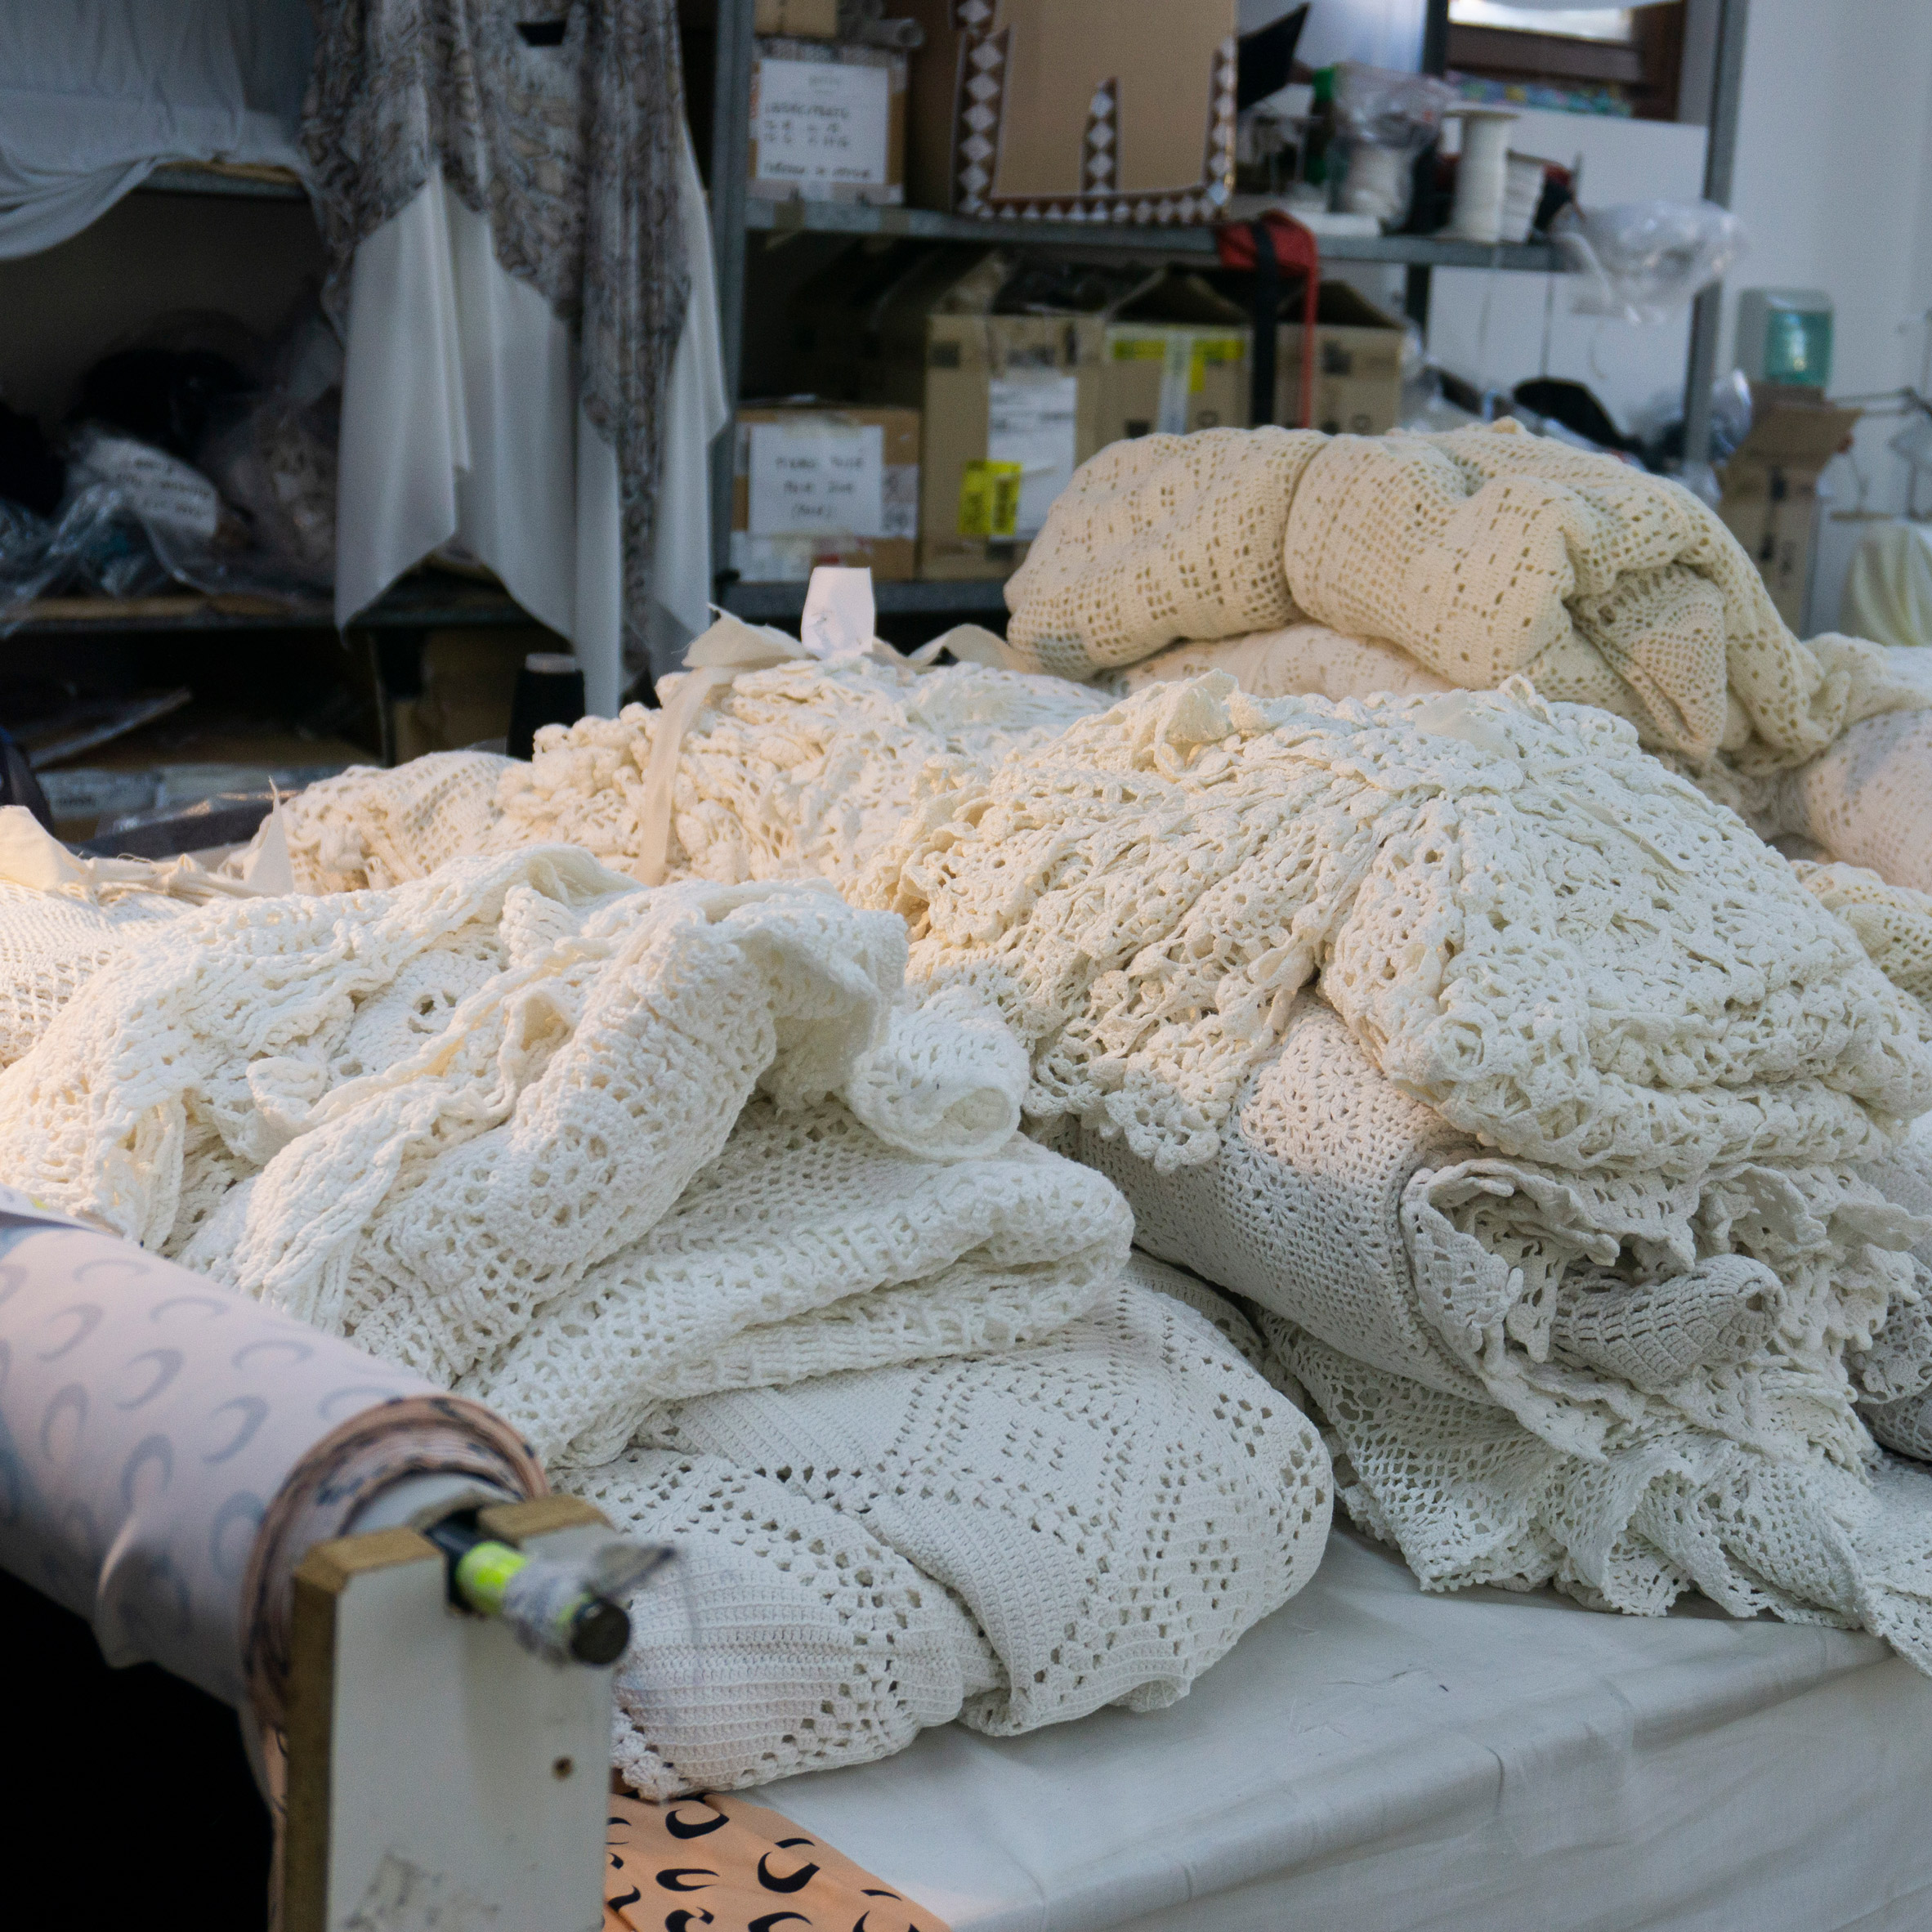 Pile of discarded household linens for turning into Marine Serre garments